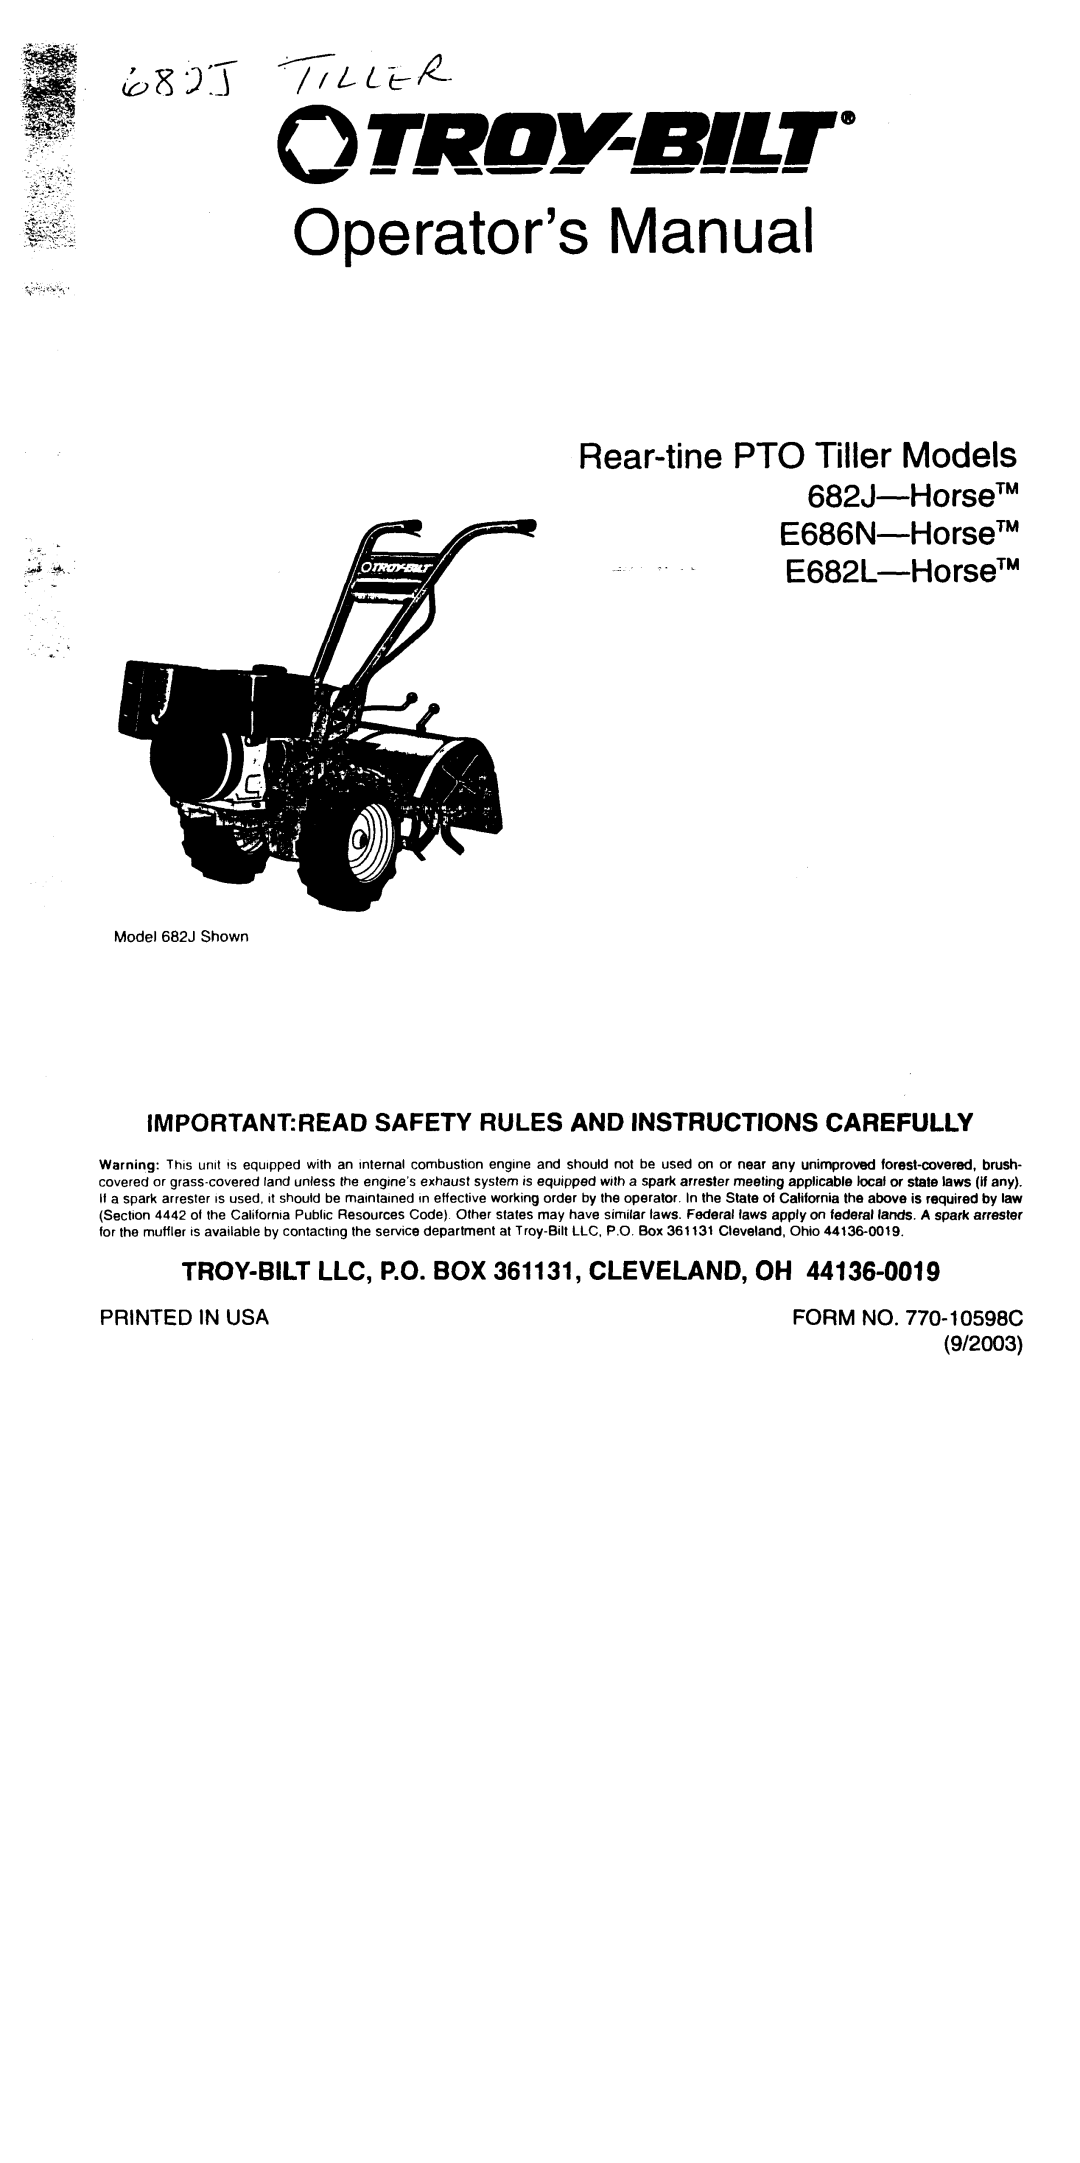 Troy-Bilt E686N, 682J manual Importantread Safety Rules And Instructions Carefully, Printed In Usa, FORM NO. 770-10598D 